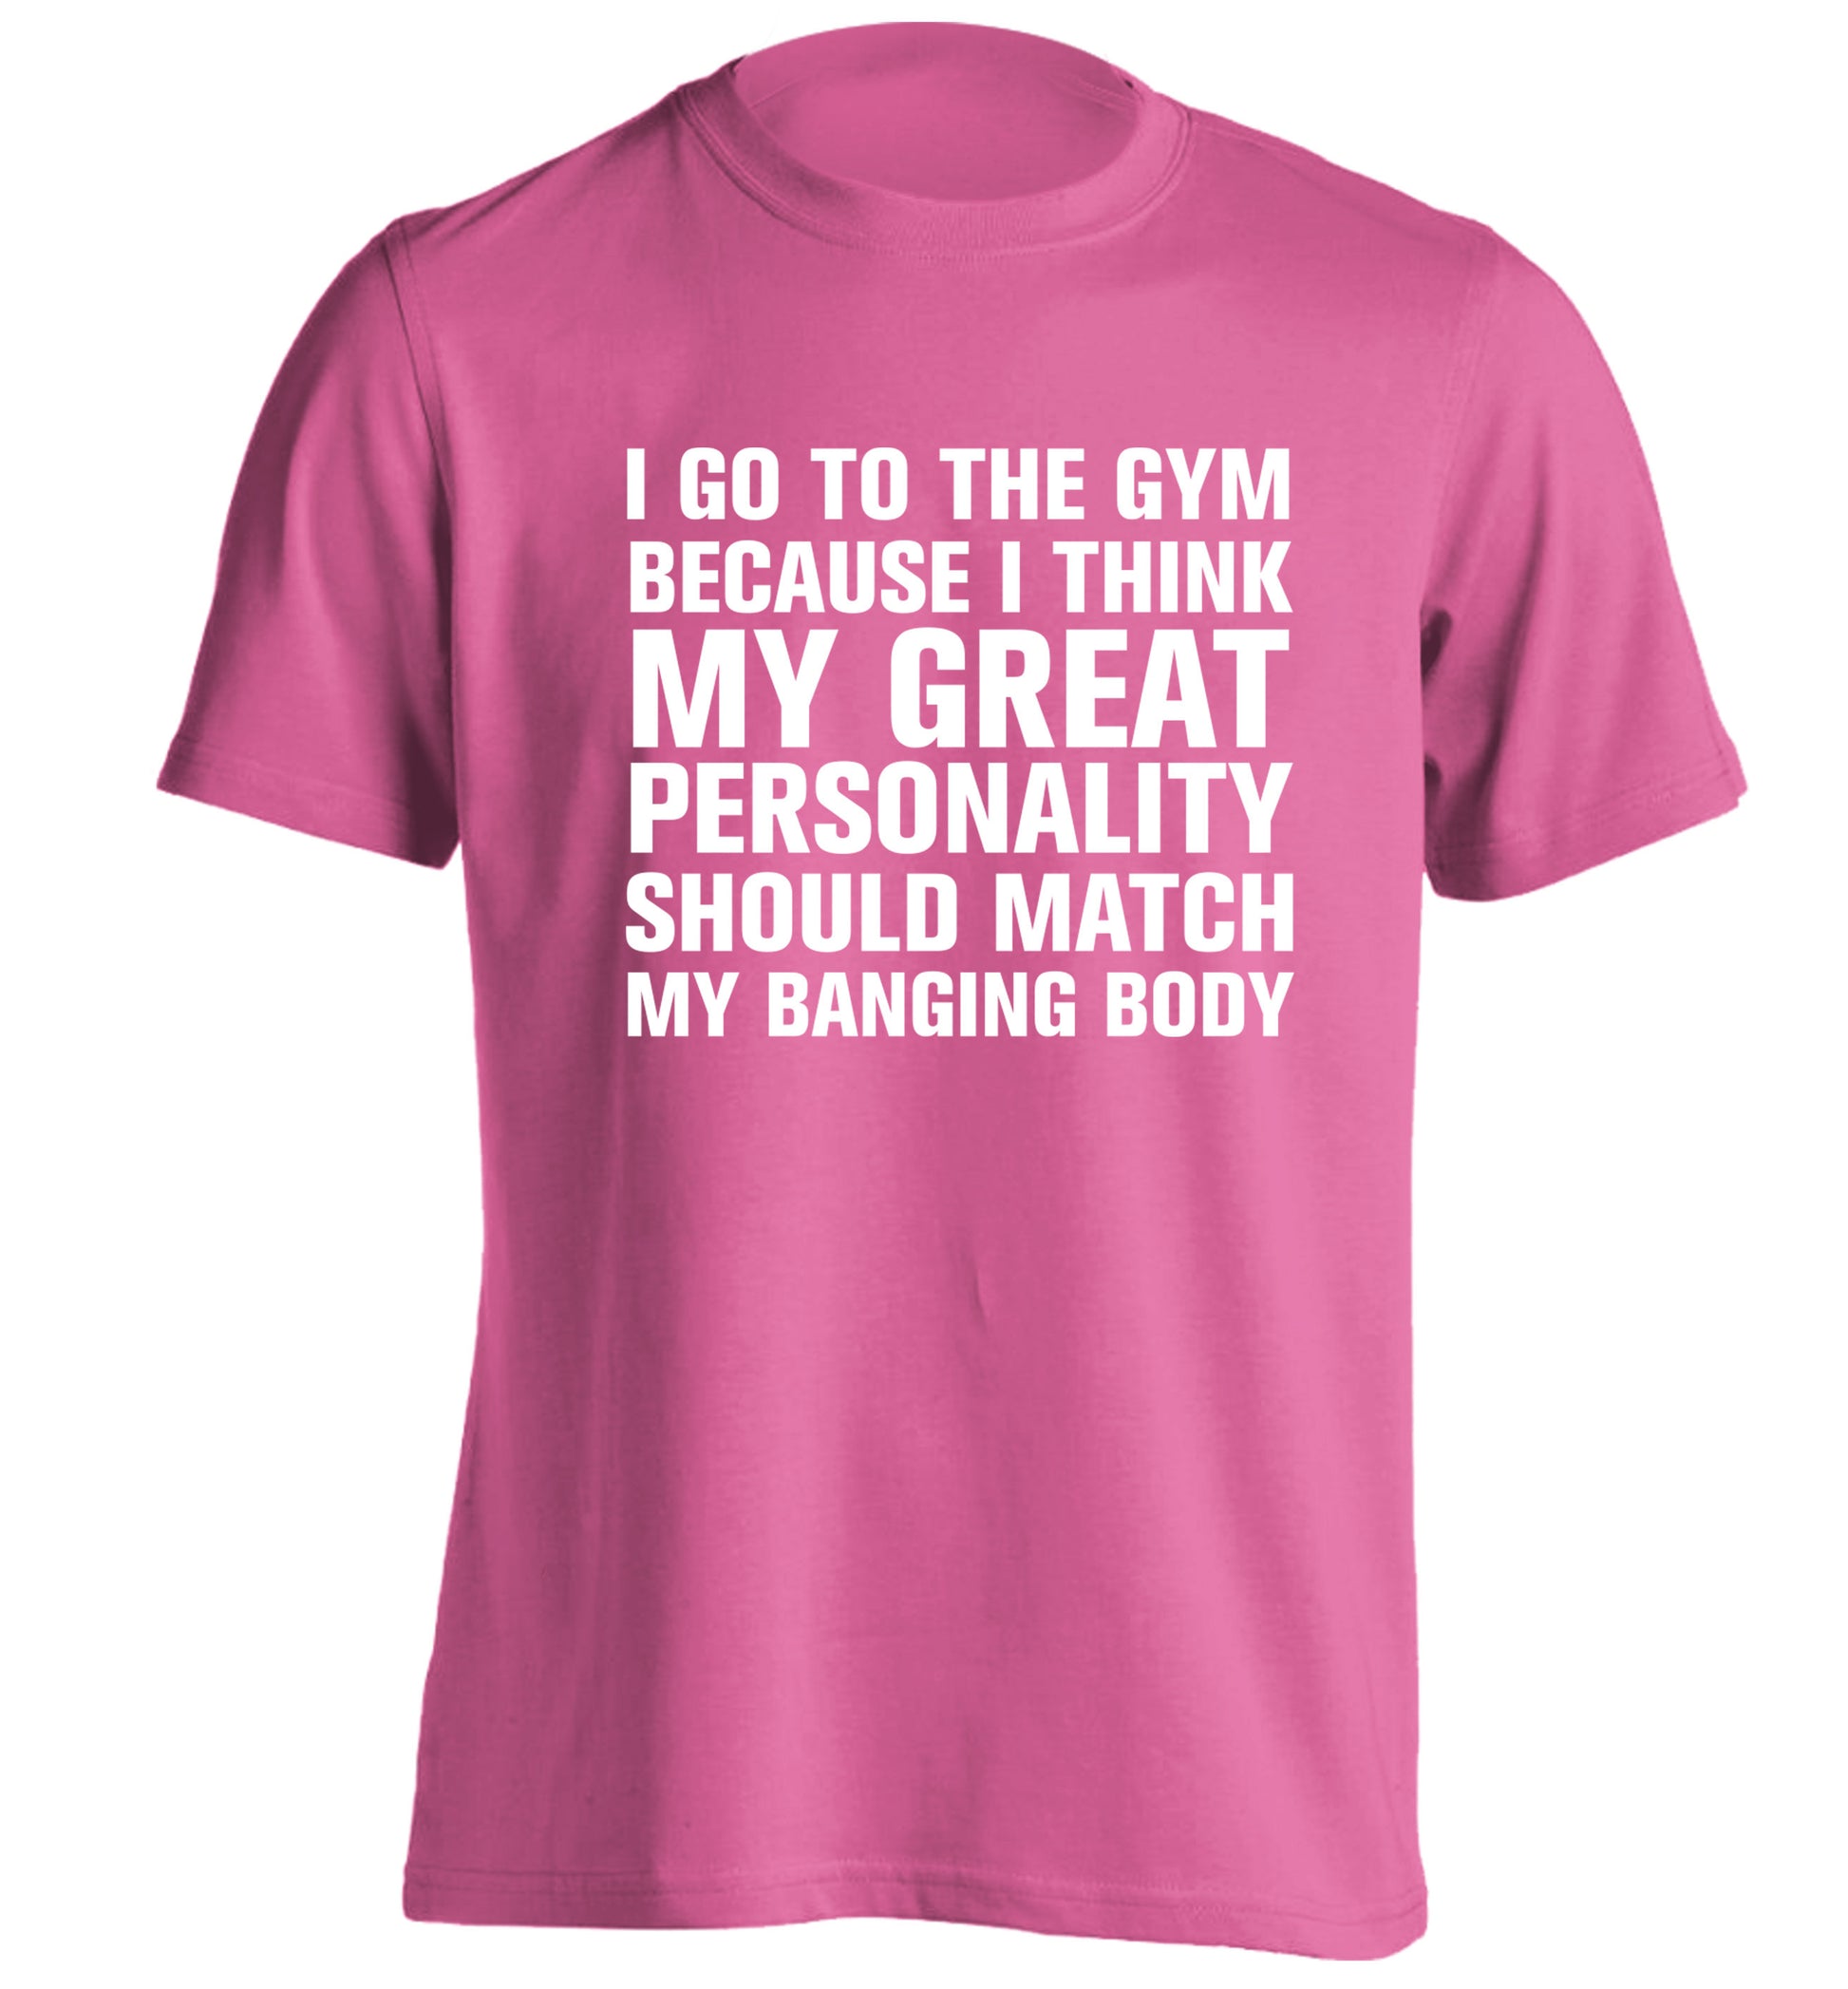 I go to the gym because I think my great personality should match my banging body adults unisex pink Tshirt 2XL